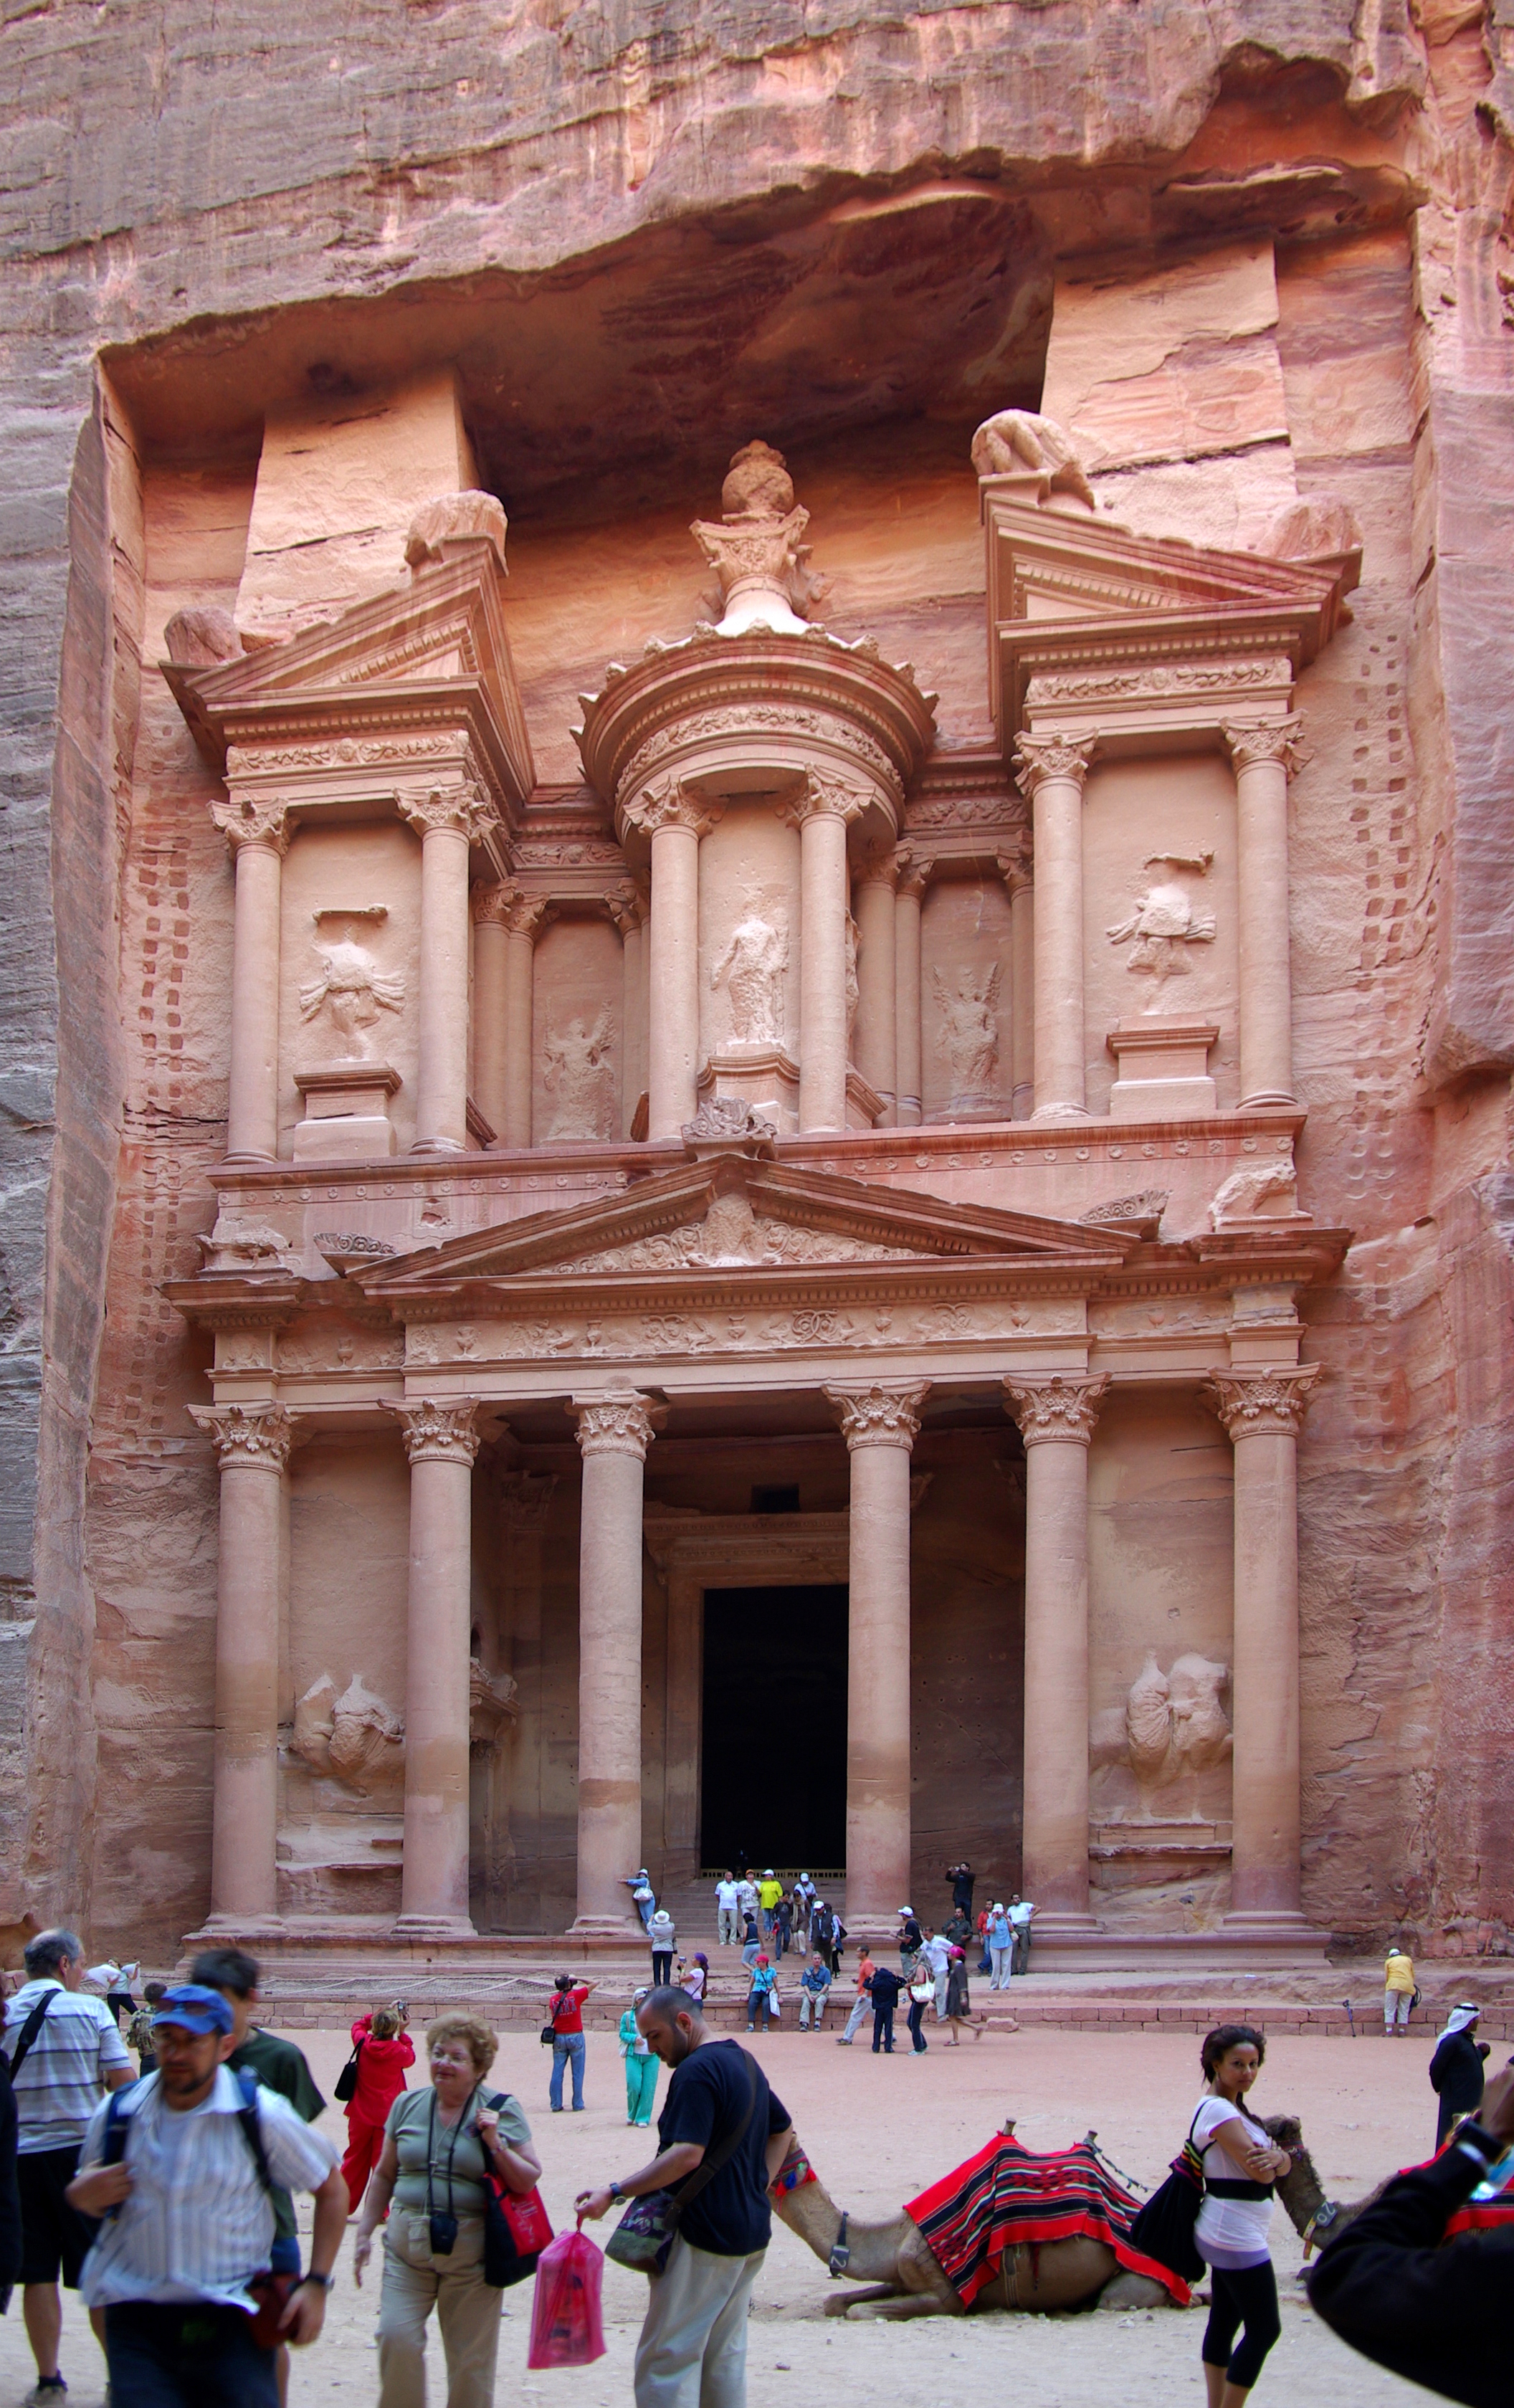 45 Most Amazing Pictures Of The Petra In Jordan